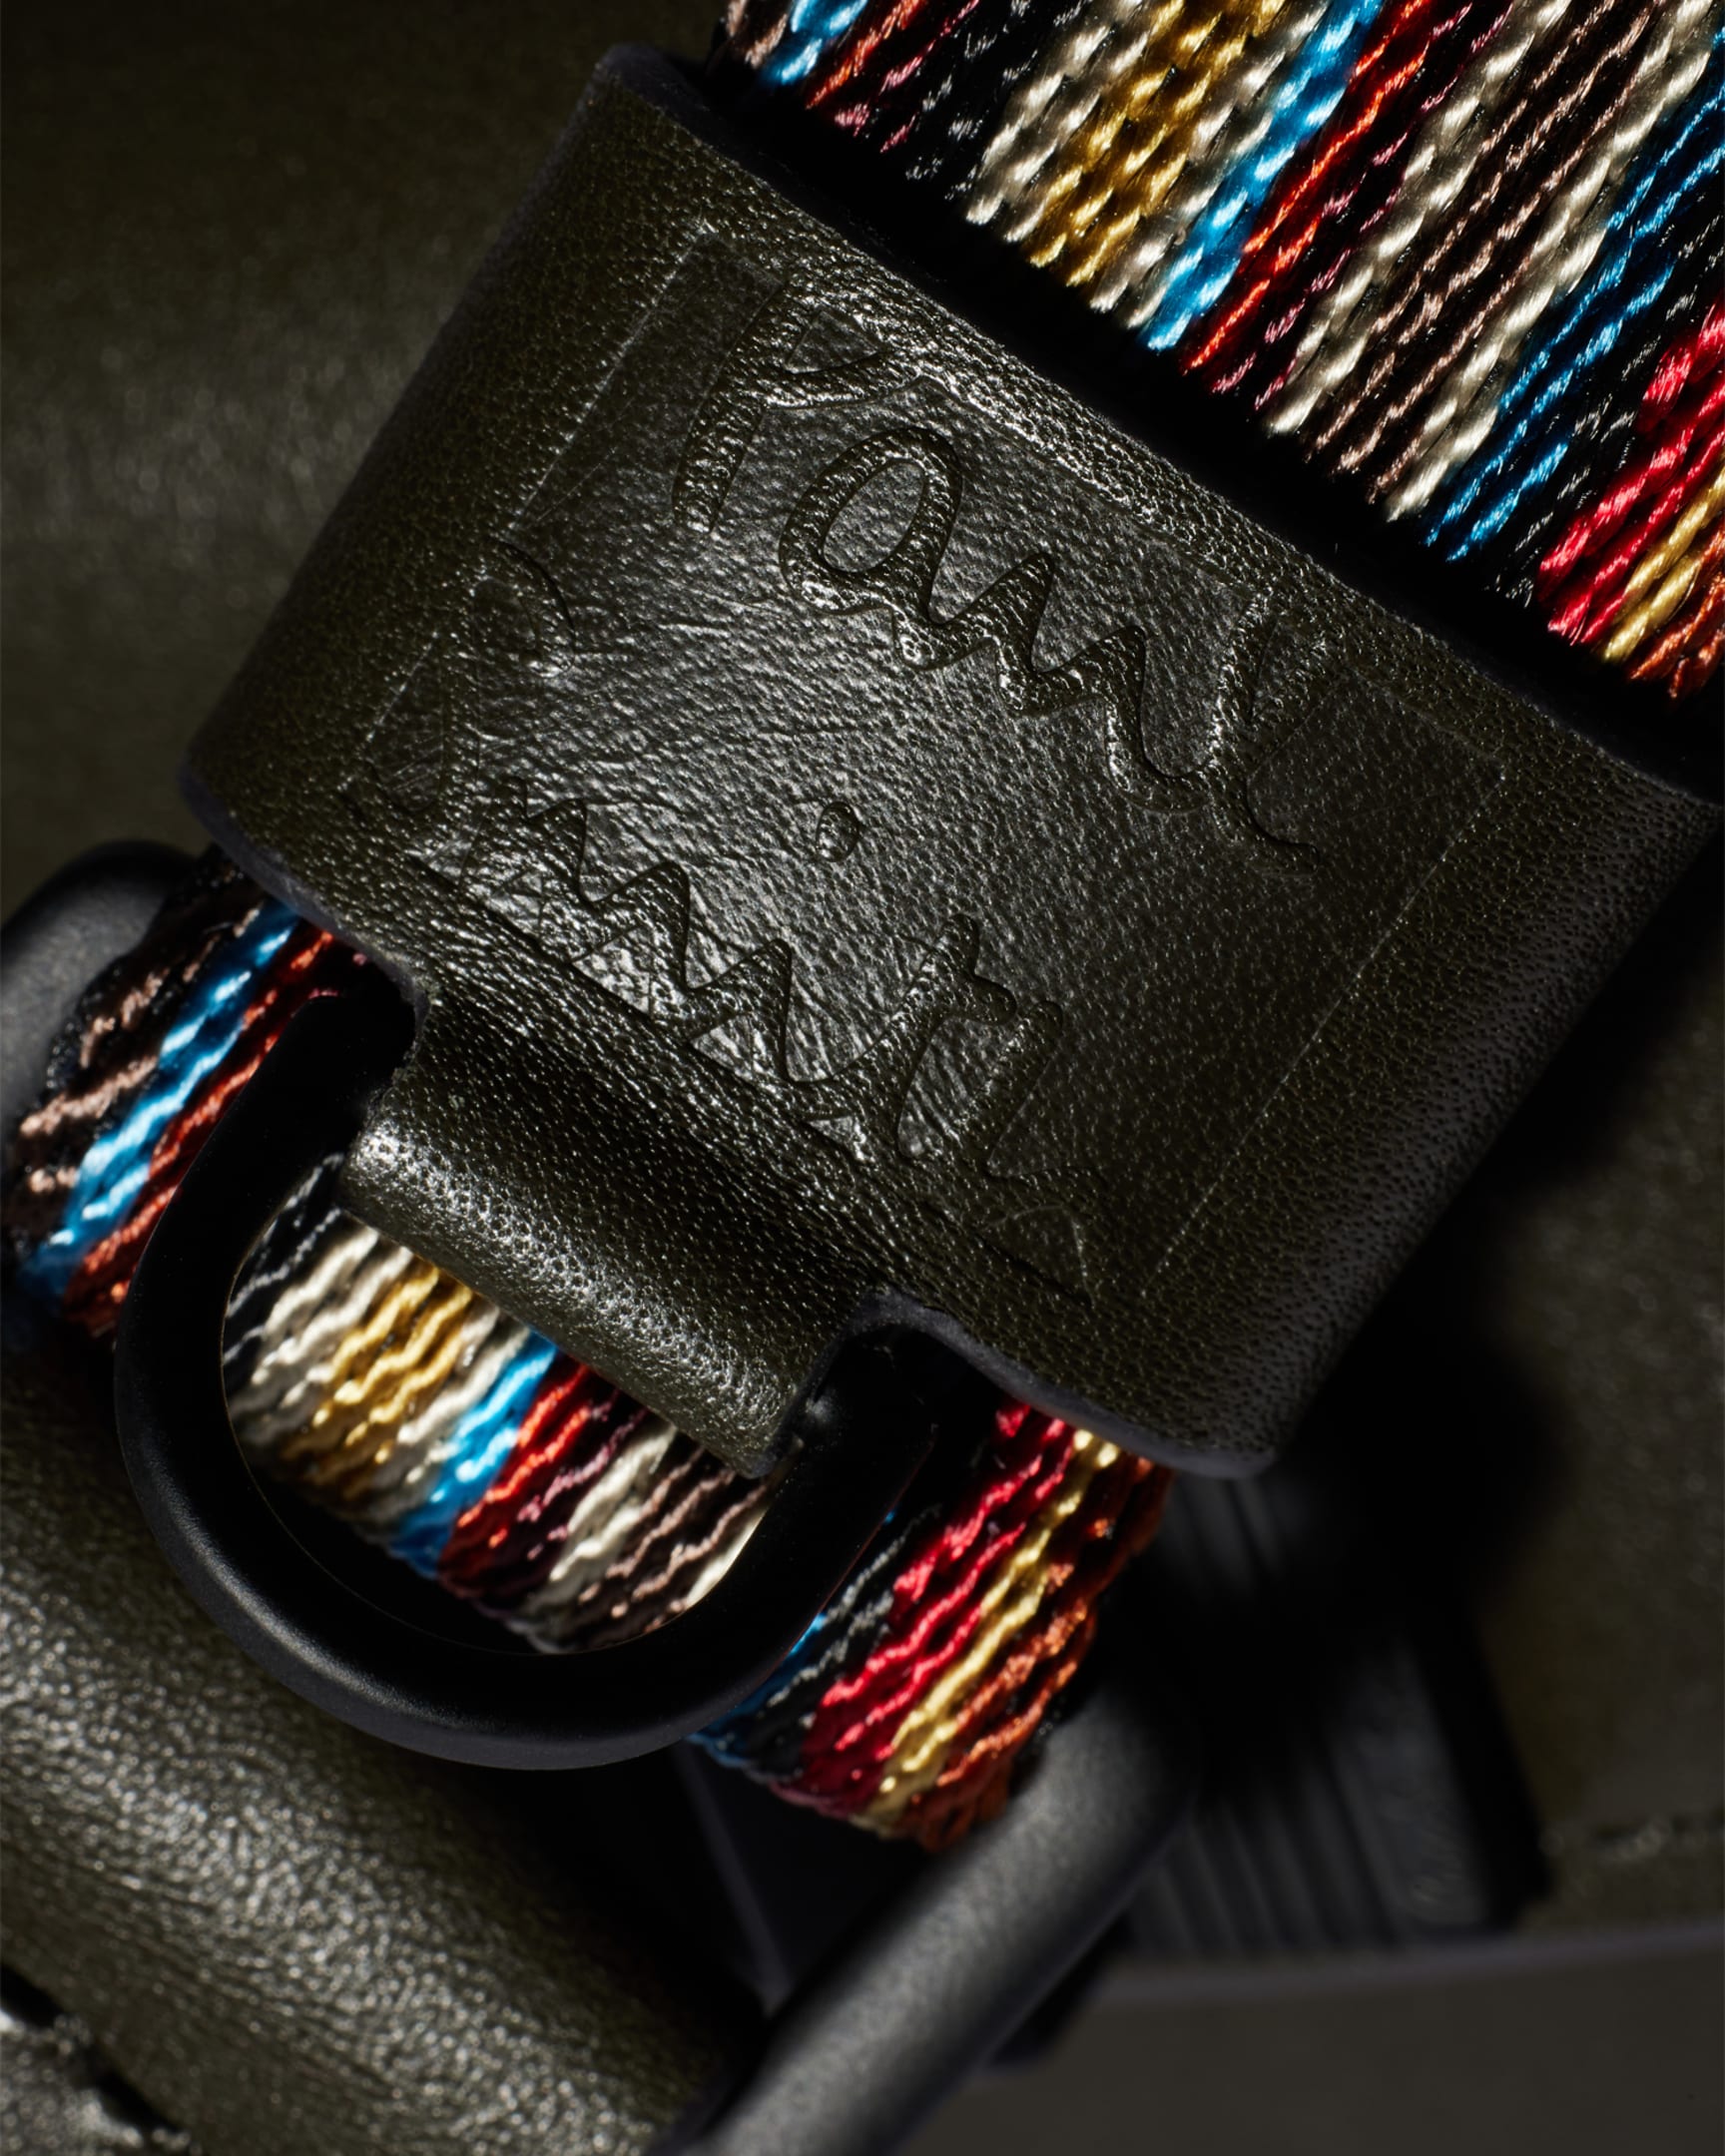 Detail View - Dark Green Leather 'Signature Stripe' Strap Phone Bag Paul Smith